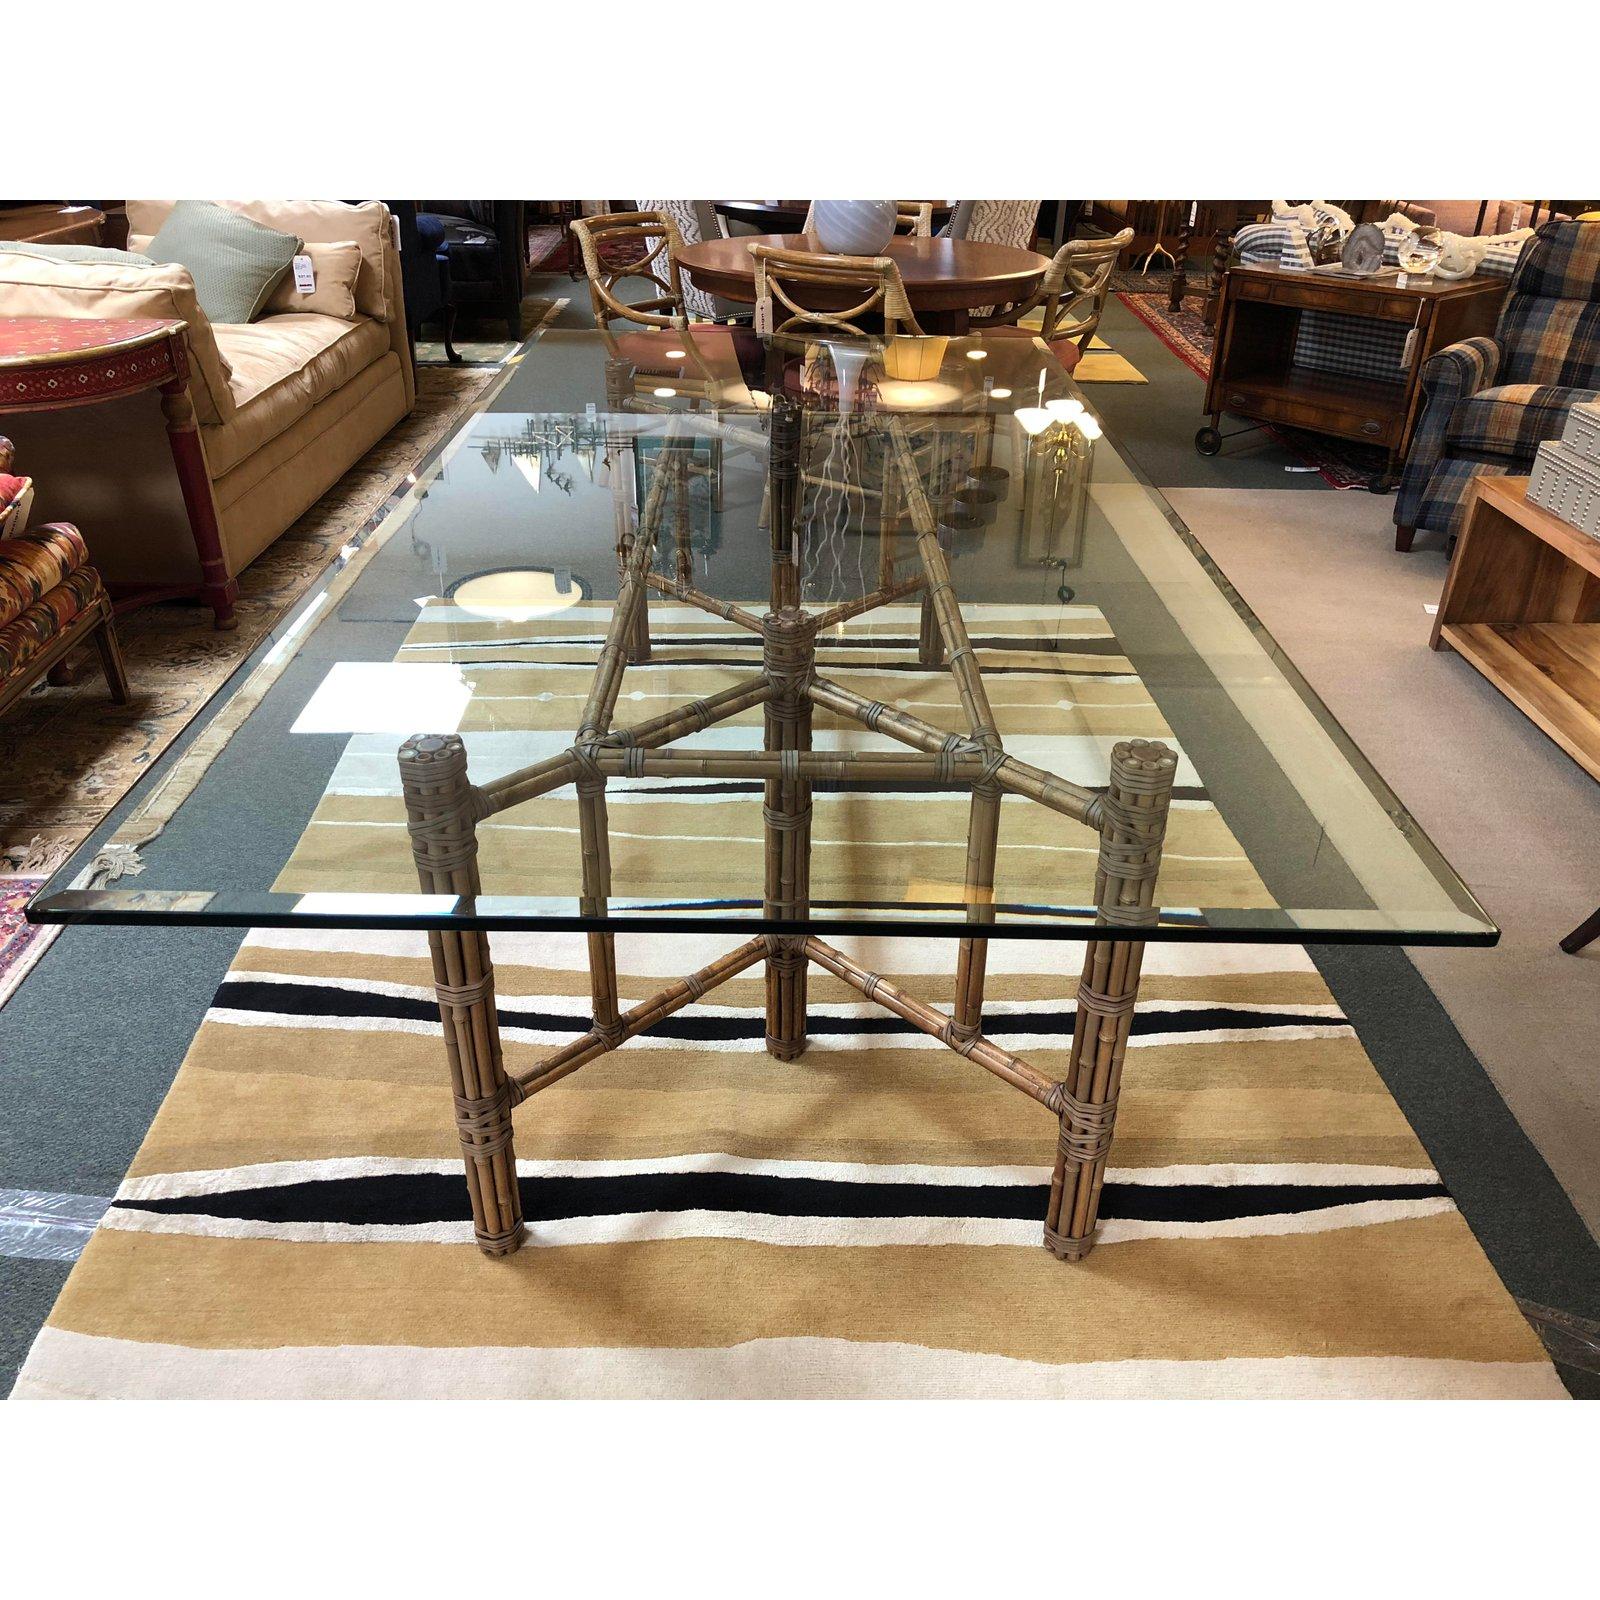 A McGuire dining table. The table base is made of bamboo rods wrapped around Iron rods, they are held in place with the quintessential McGuire Leather straps. The base is topped with a beveled glass. No leaves, glass 0.75 inch.
 